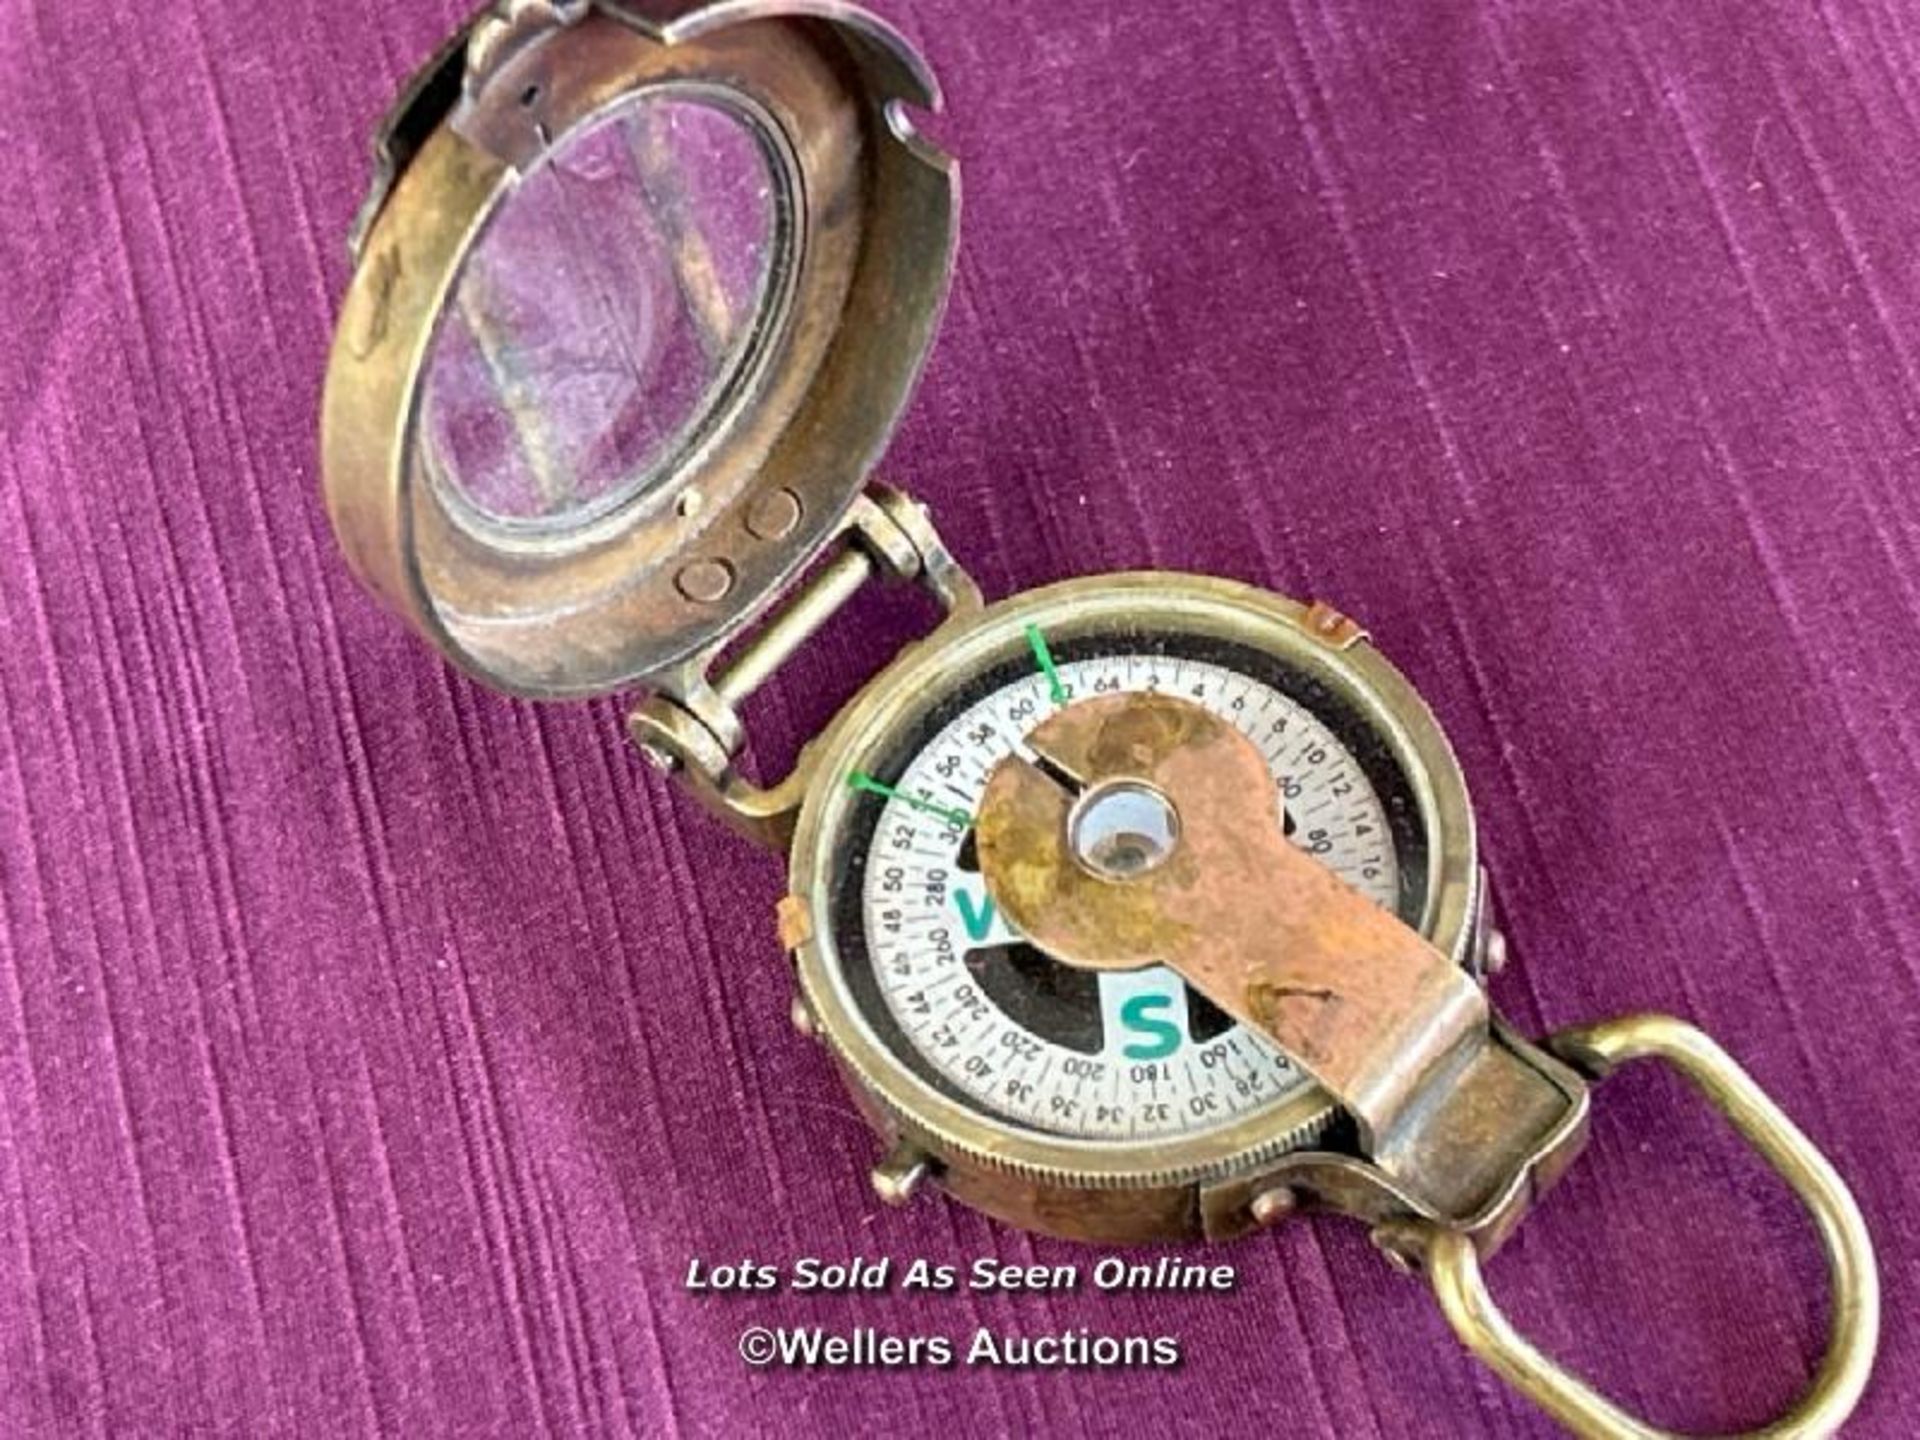 A ROSS LONDON MILITARY COMPASS IN BRASS CASE - Image 3 of 3